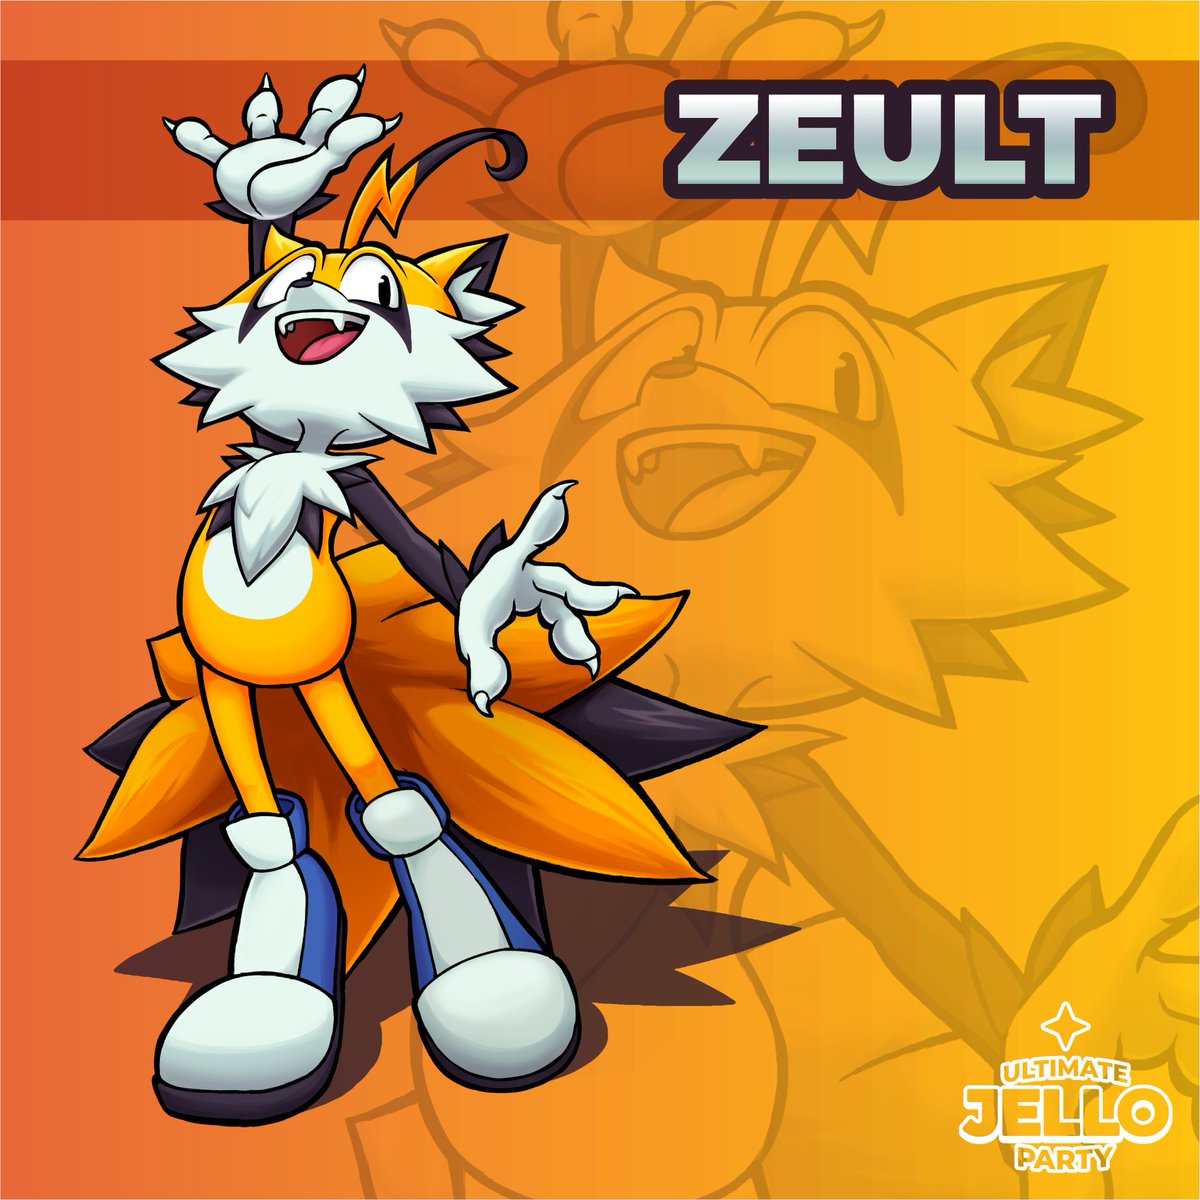 Meet the newest character in Ultimate Jello Party! He is lively, full of energy and ready to face any challenge. We present to you the Zeult...

#gamedev #partygame #pixelart #indie #games #gaming